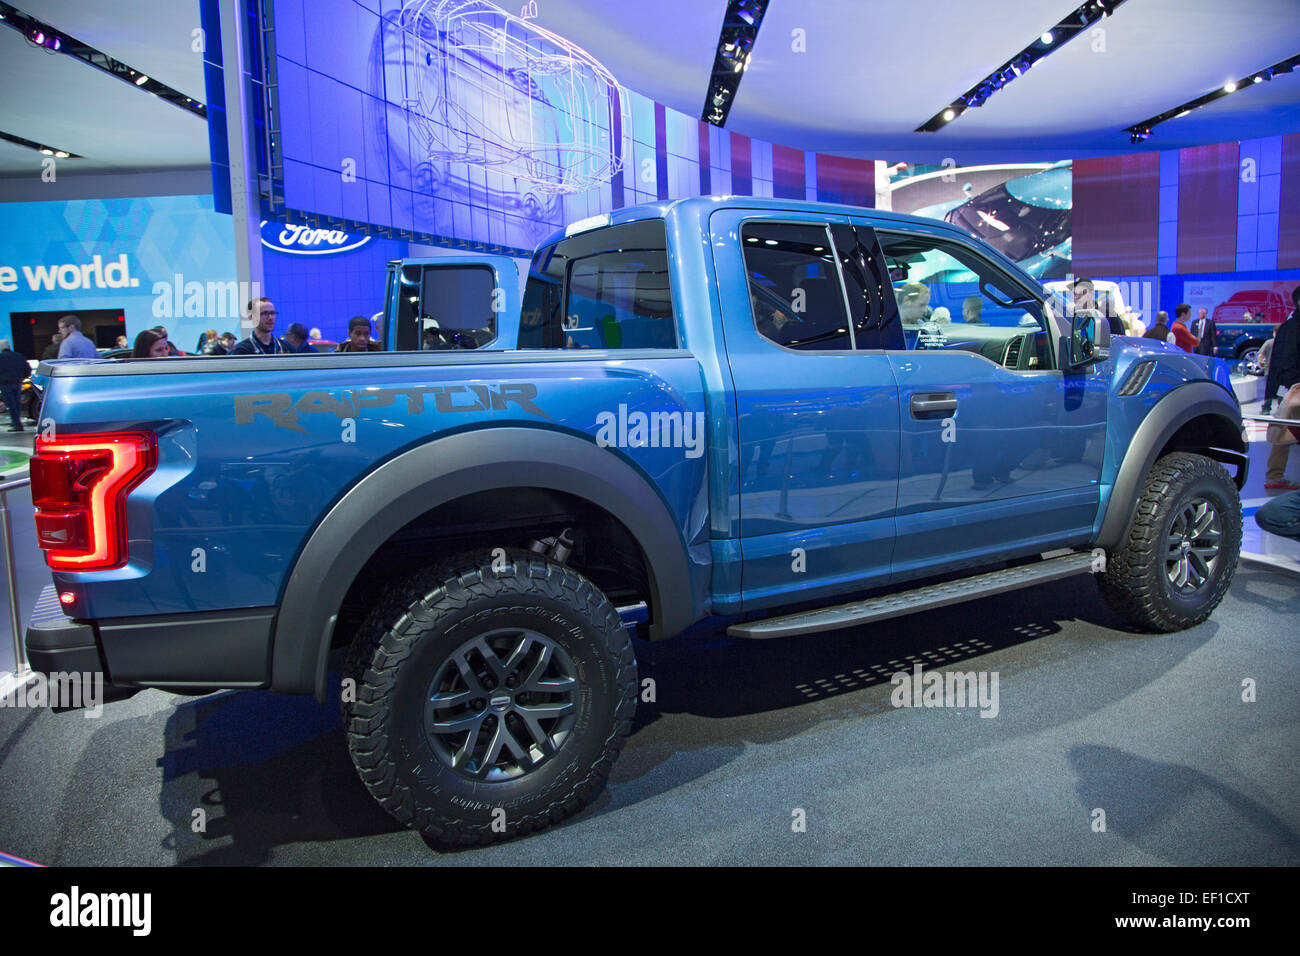 Detroit, Michigan - The Ford F-150 Raptor aluminum body pickup truck on display at the North American International Auto Show. Stock Photo